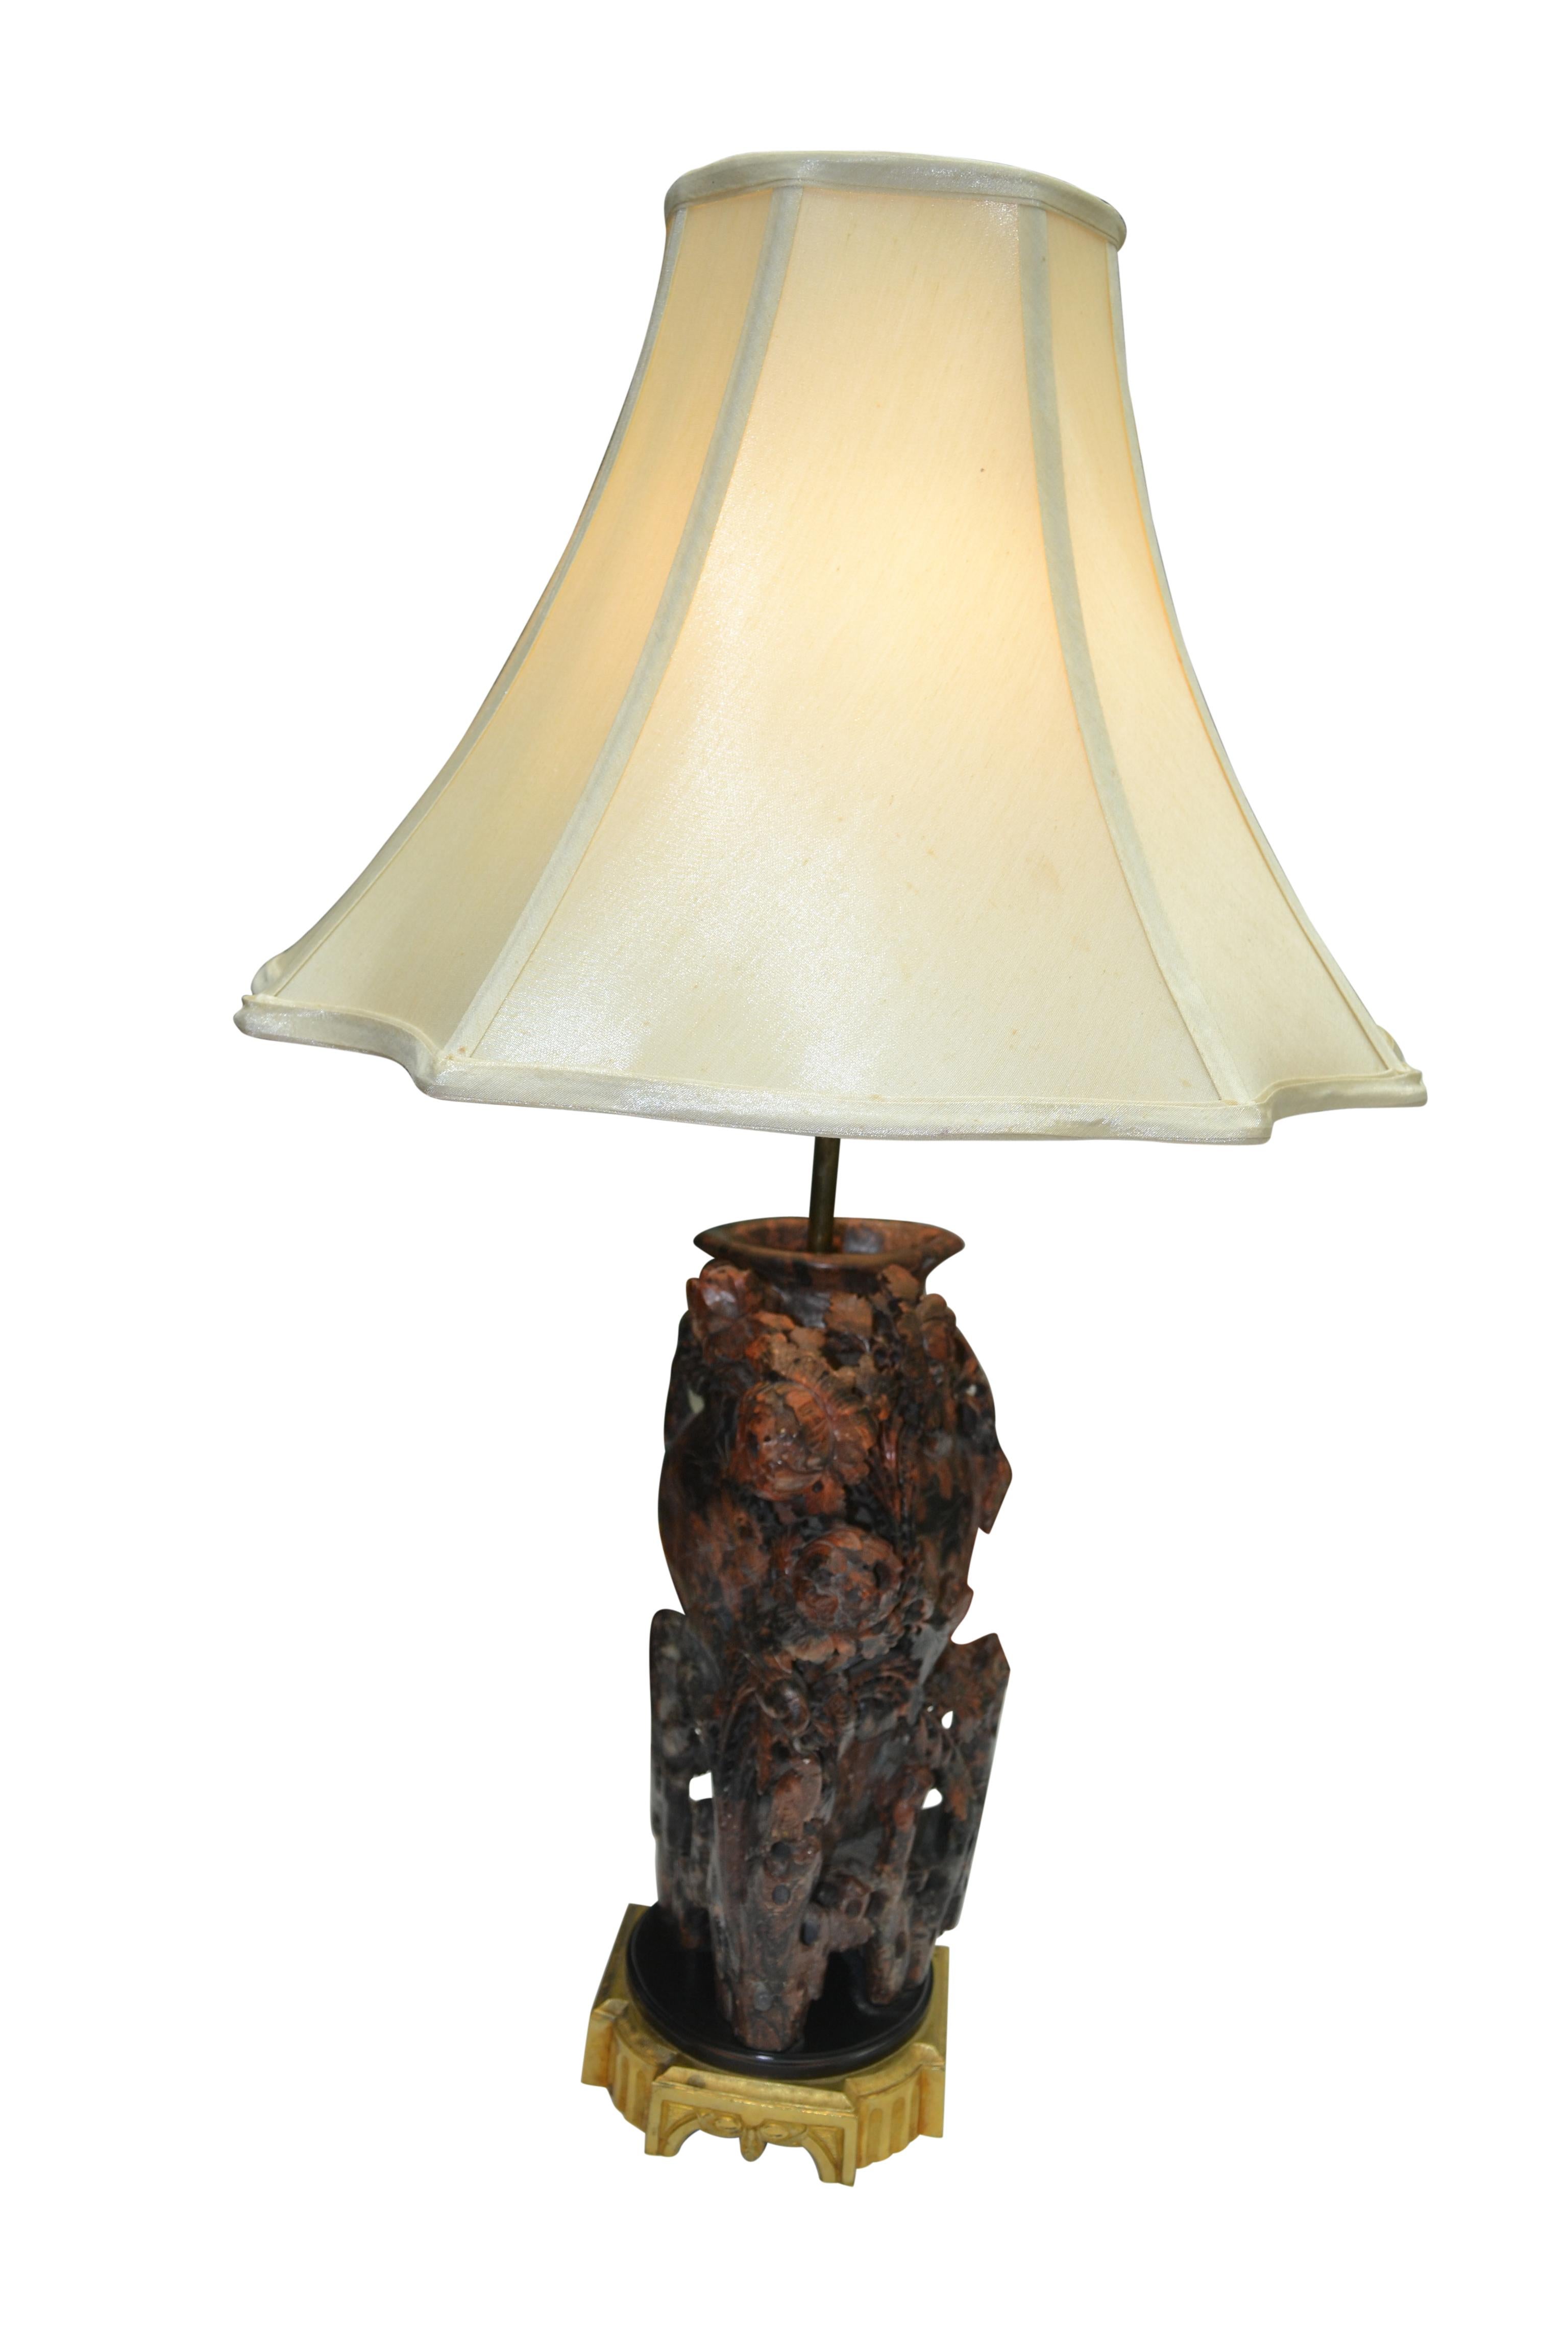 A carved soapstone lamp base, unusual because of the color of the stone; reddish, brown and black. The carving is in the shape of a vase which is almost totally encrusted in 'branches' and flowers and buds. There is a great deal of all-over open